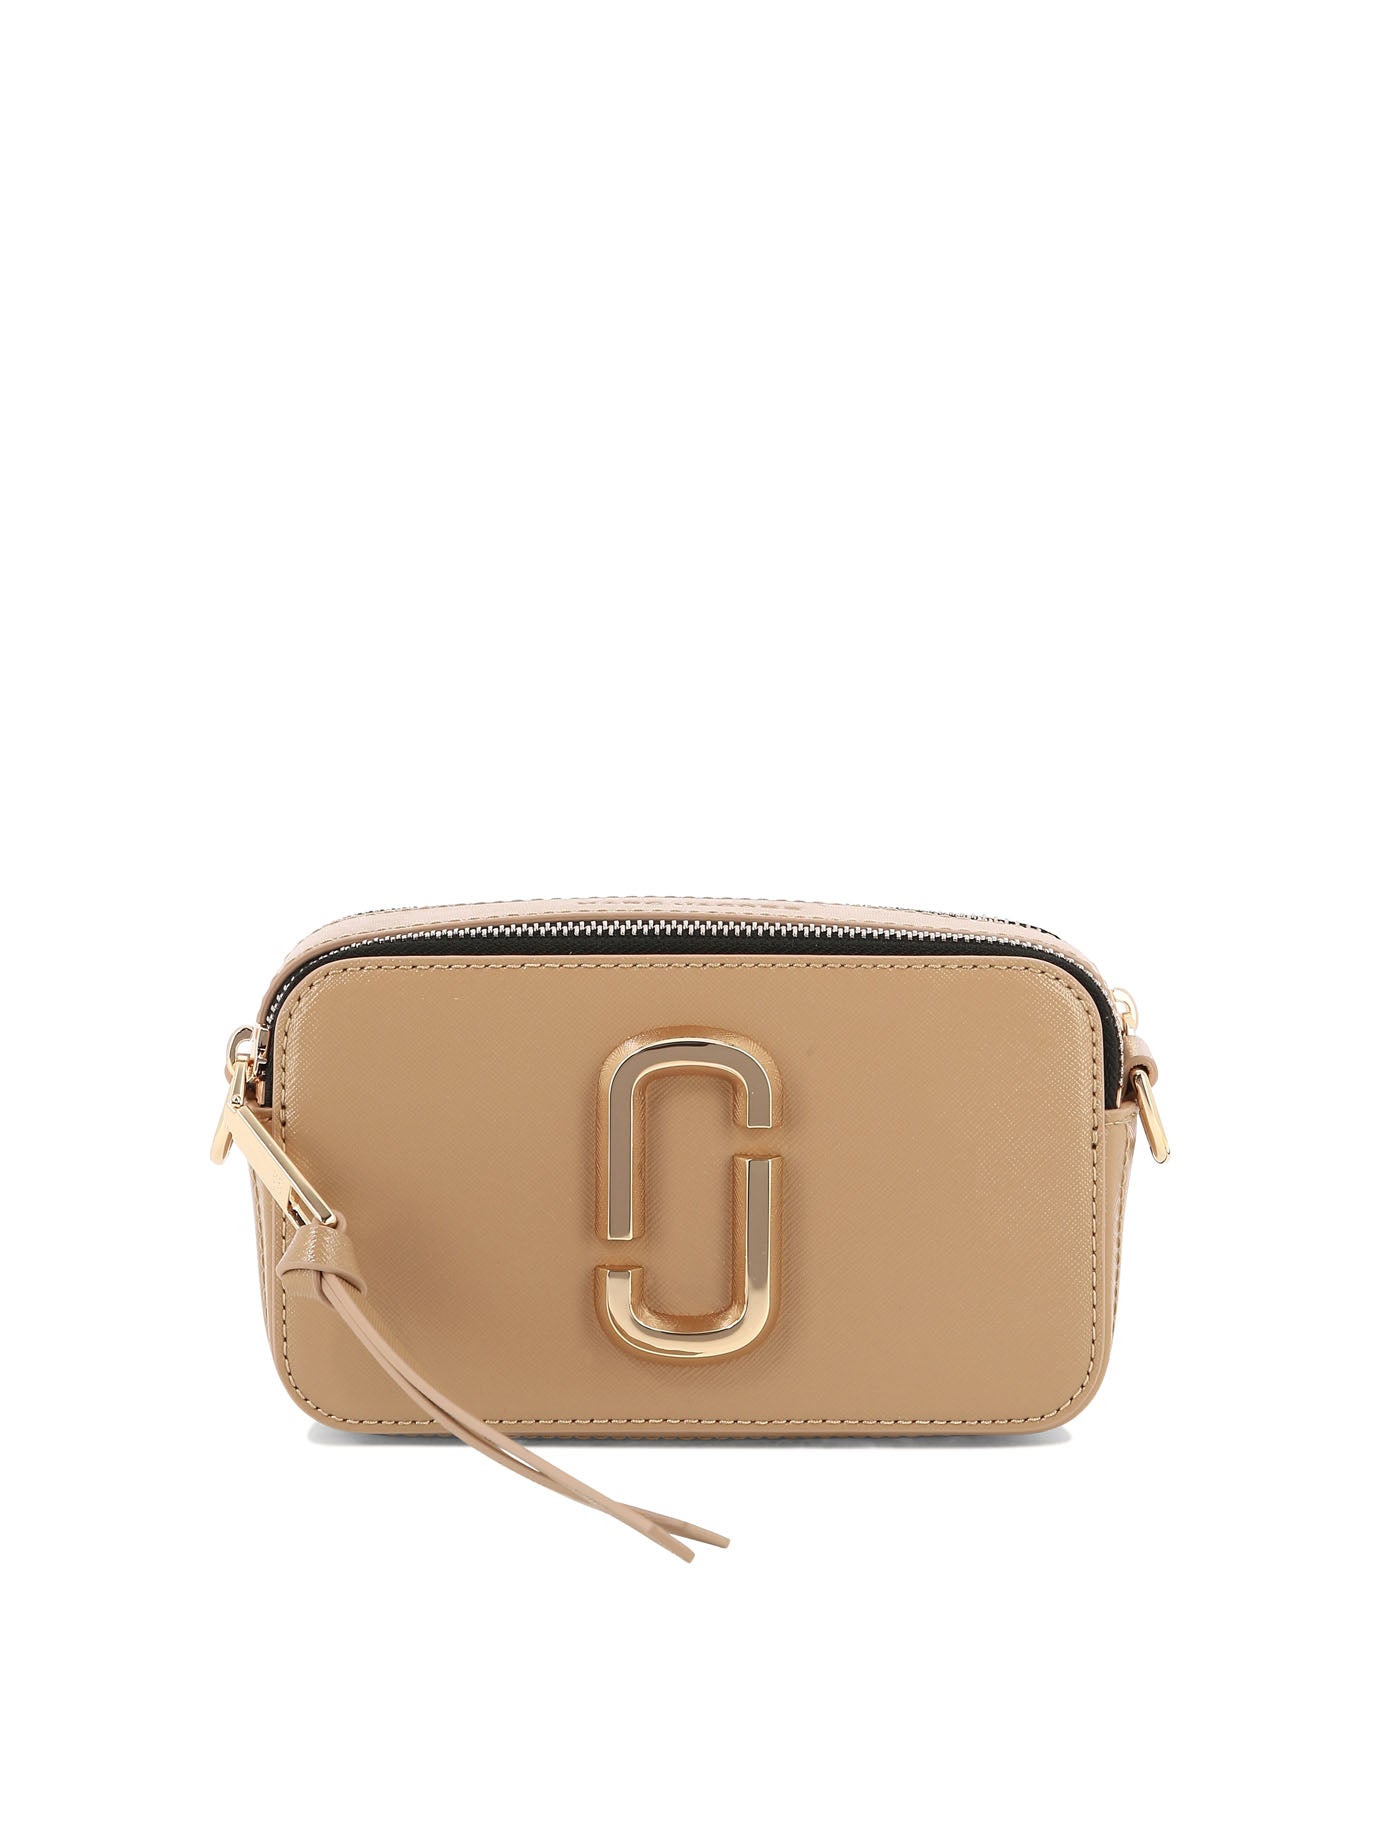 Marc Jacobs The Marc Jacobs Leather Snapshot Camera Cross-Body Bag for Women